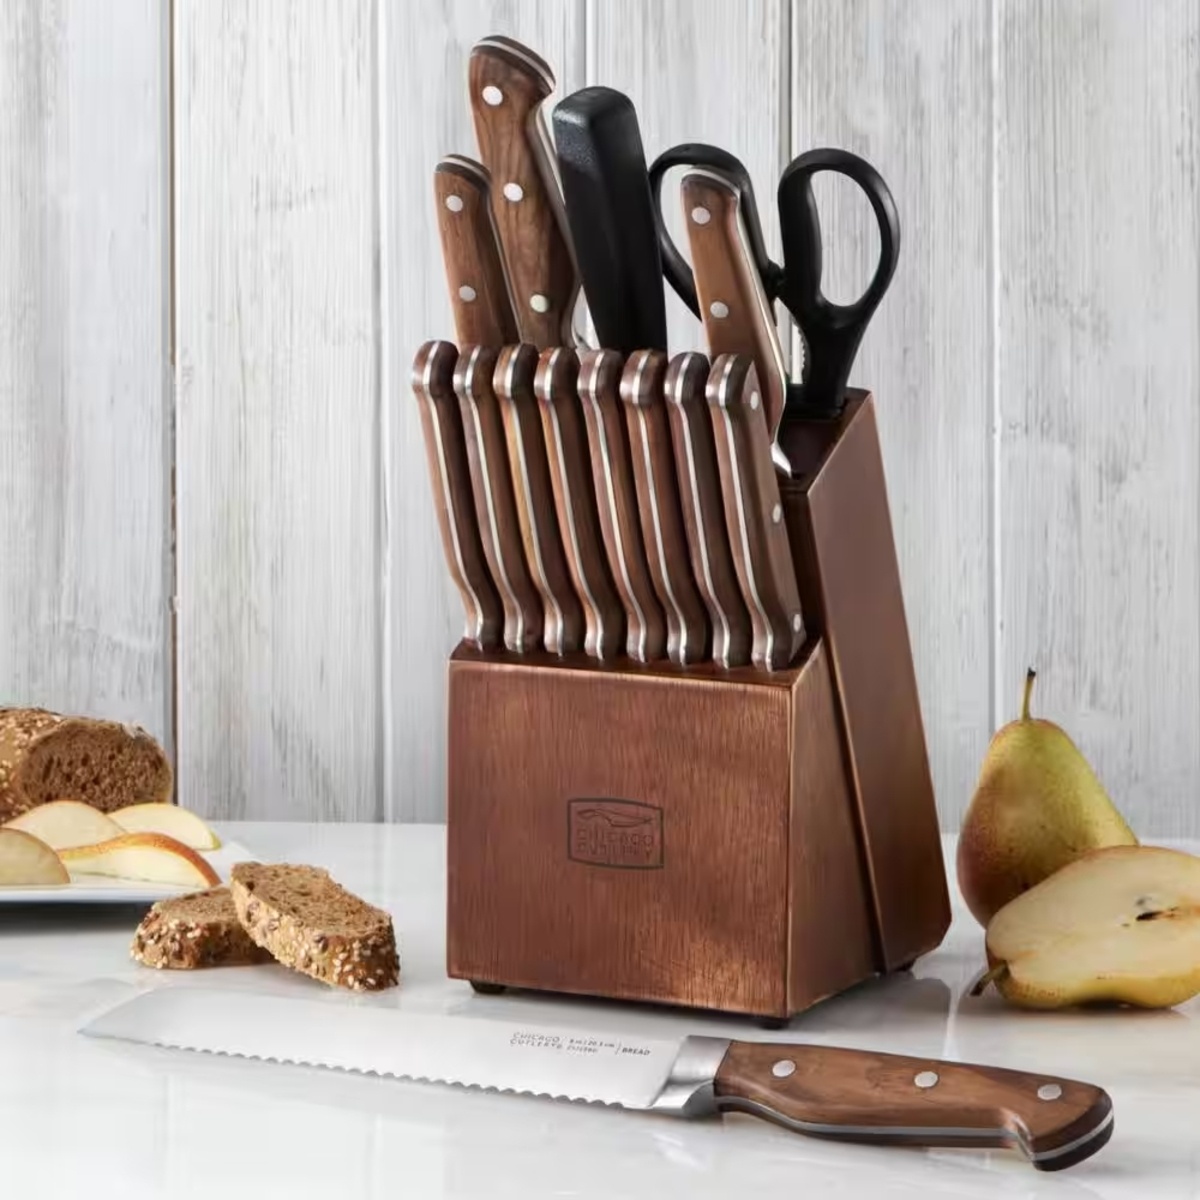  MARTHA STEWART Eastwalk 14 Piece High Carbon Stainless Steel Cutlery  Knife Block Set w/ABS Triple Riveted Forged Handle Acacia Wood Block -  Linen White: Home & Kitchen